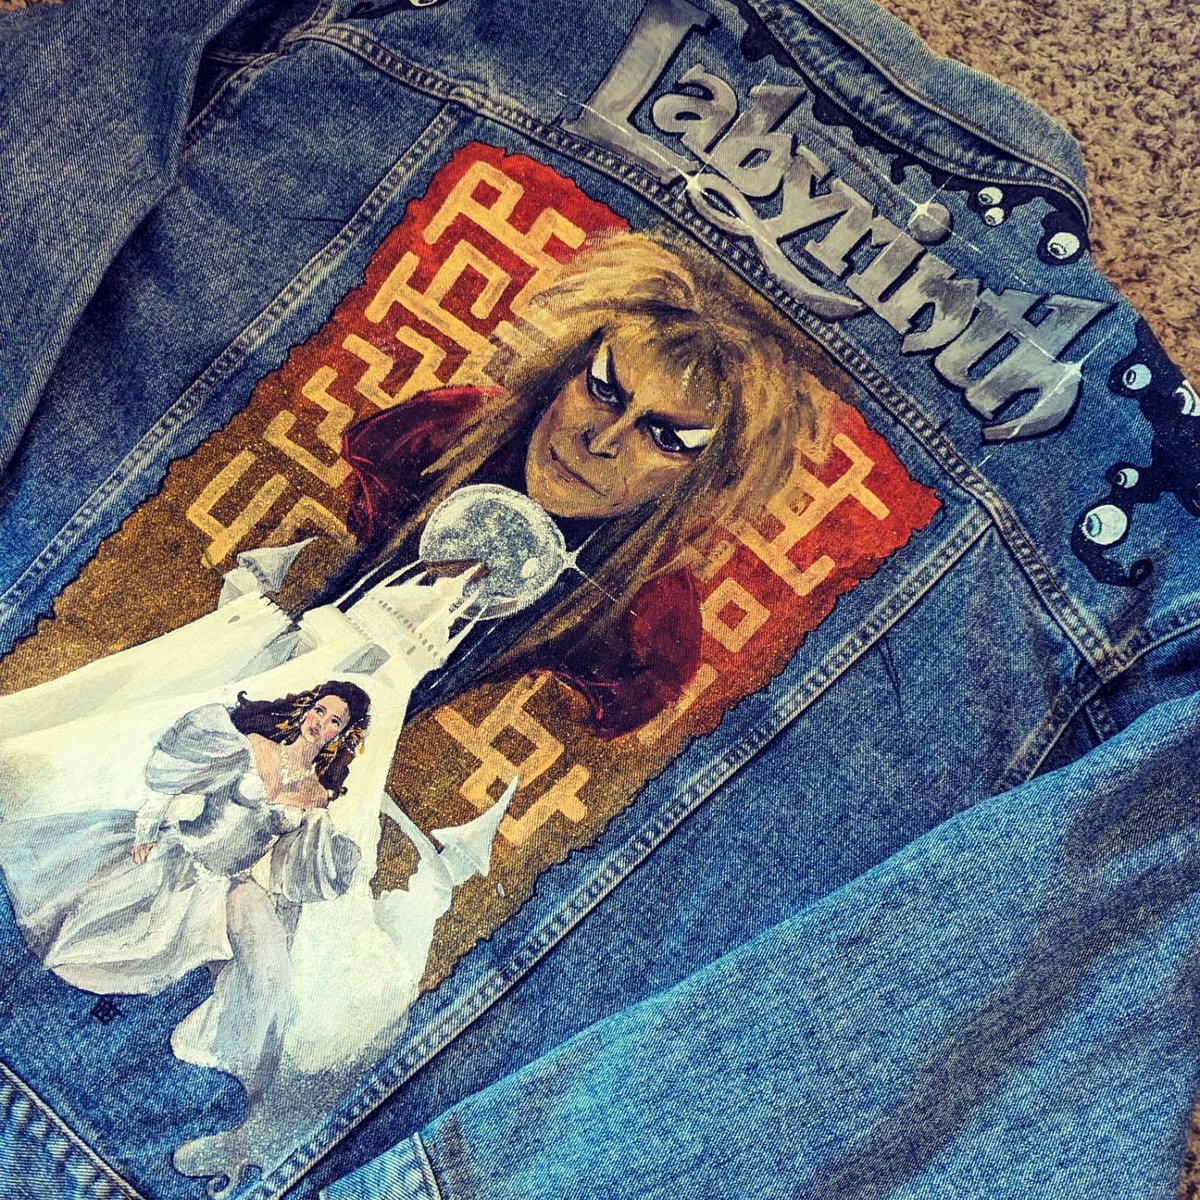 Hypothetically speaking how much would someone pay for something like this
#art #thelabyrinth #jimhenson #jeanjacket #handpainted #nerd #80s #davidbowie #jenniferconnely